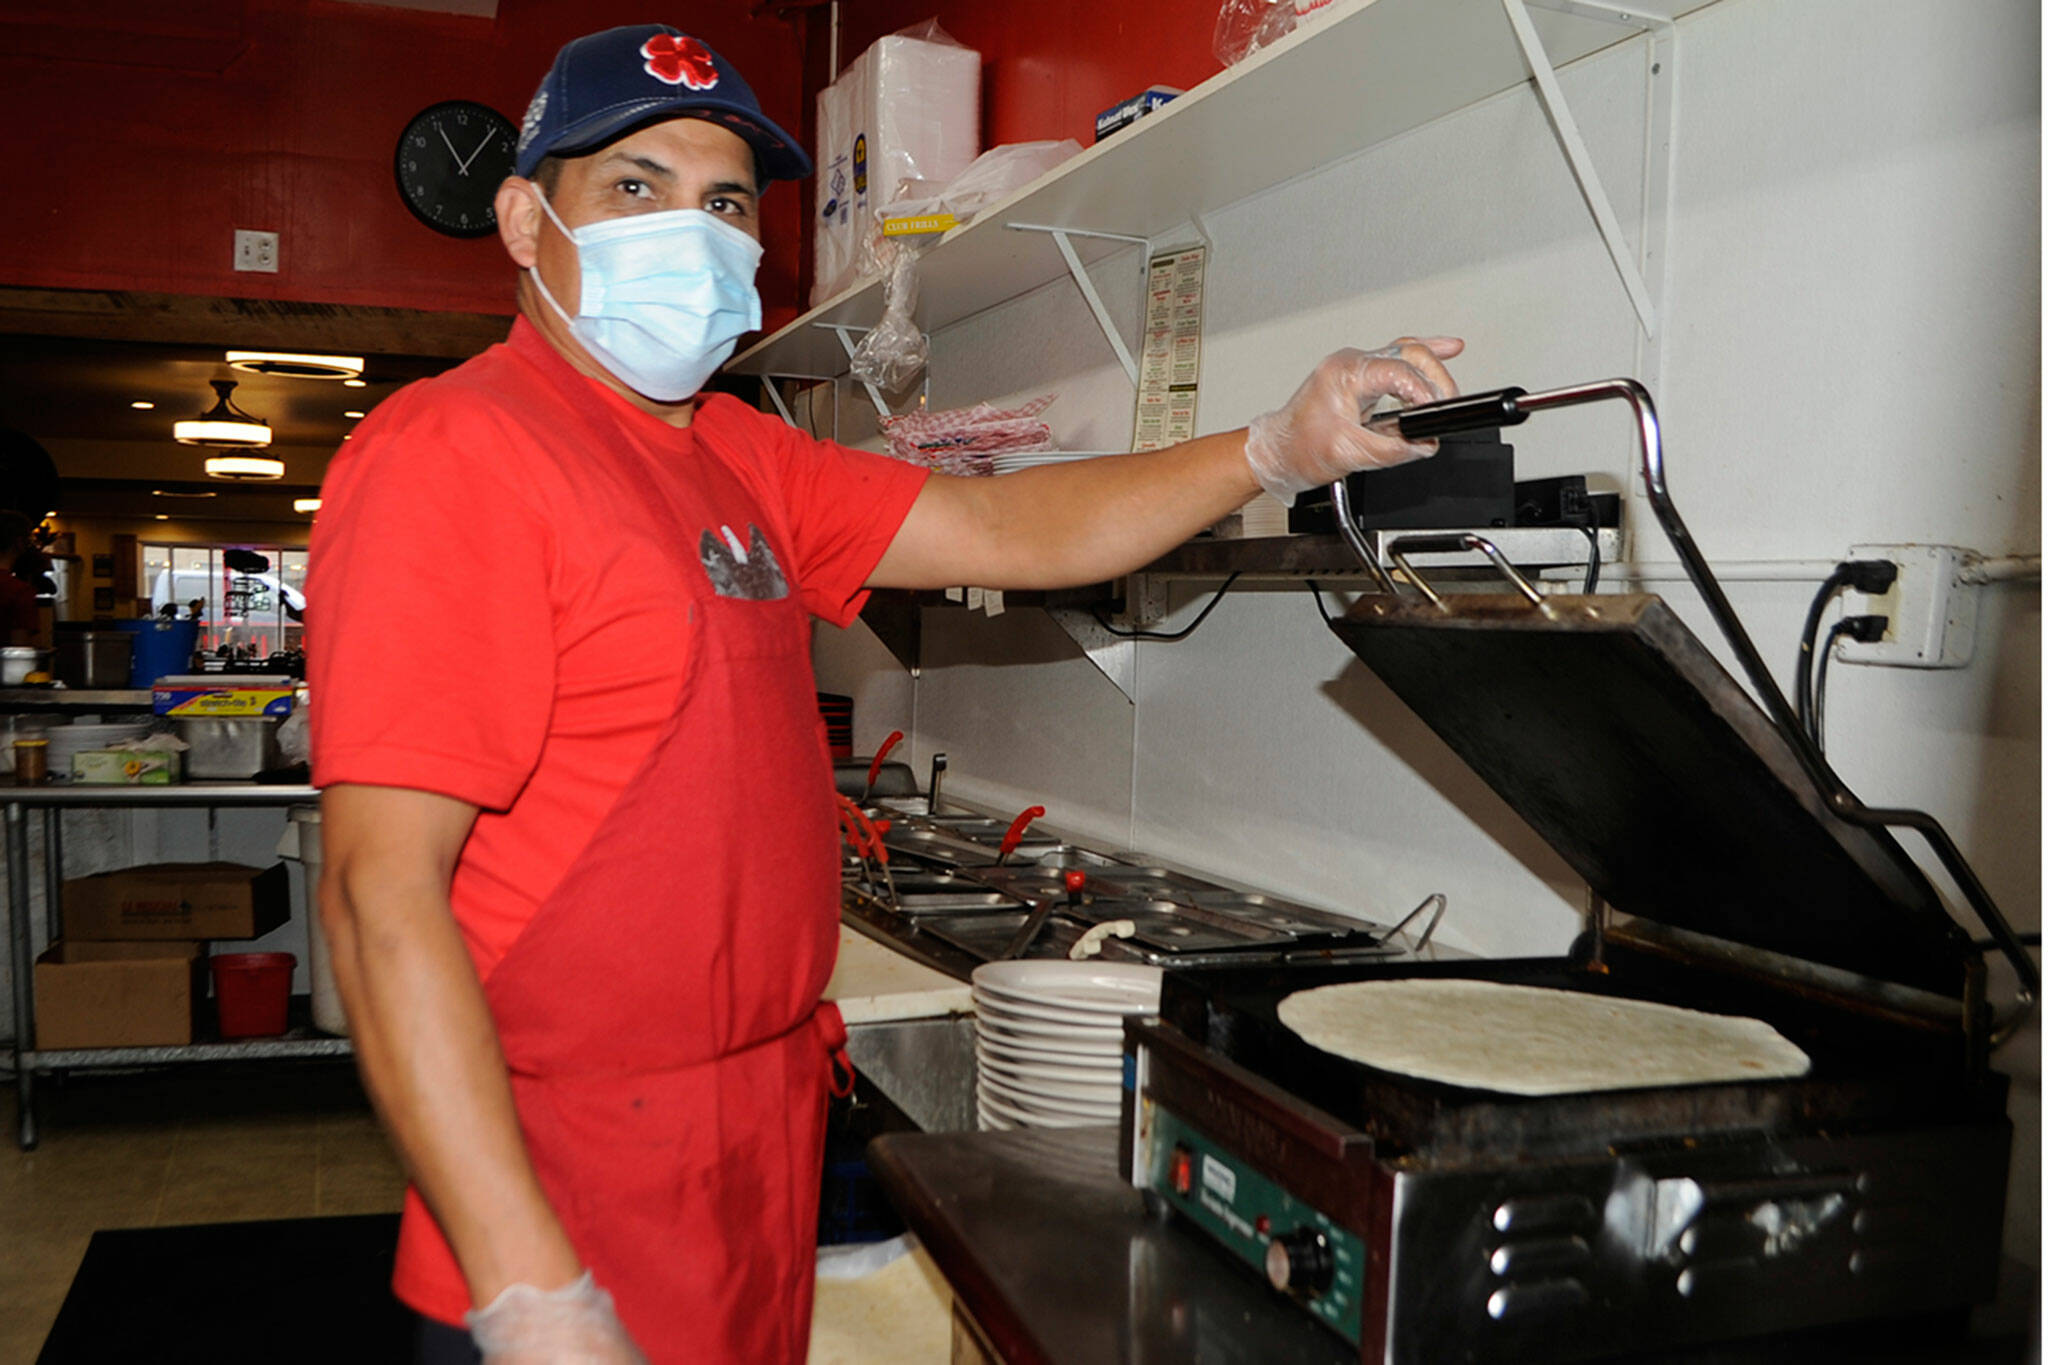 Jose Garcia, co-owner of Jose’s Famous Salsa, says he and his wife have kept most of their employees during the pandemic, thankfully. “All of our employees are really awesome,” said co-owner Angee Garcia. “If not for them, then I’d be struggling.” Sequim Gazette photo by Matthew Nash